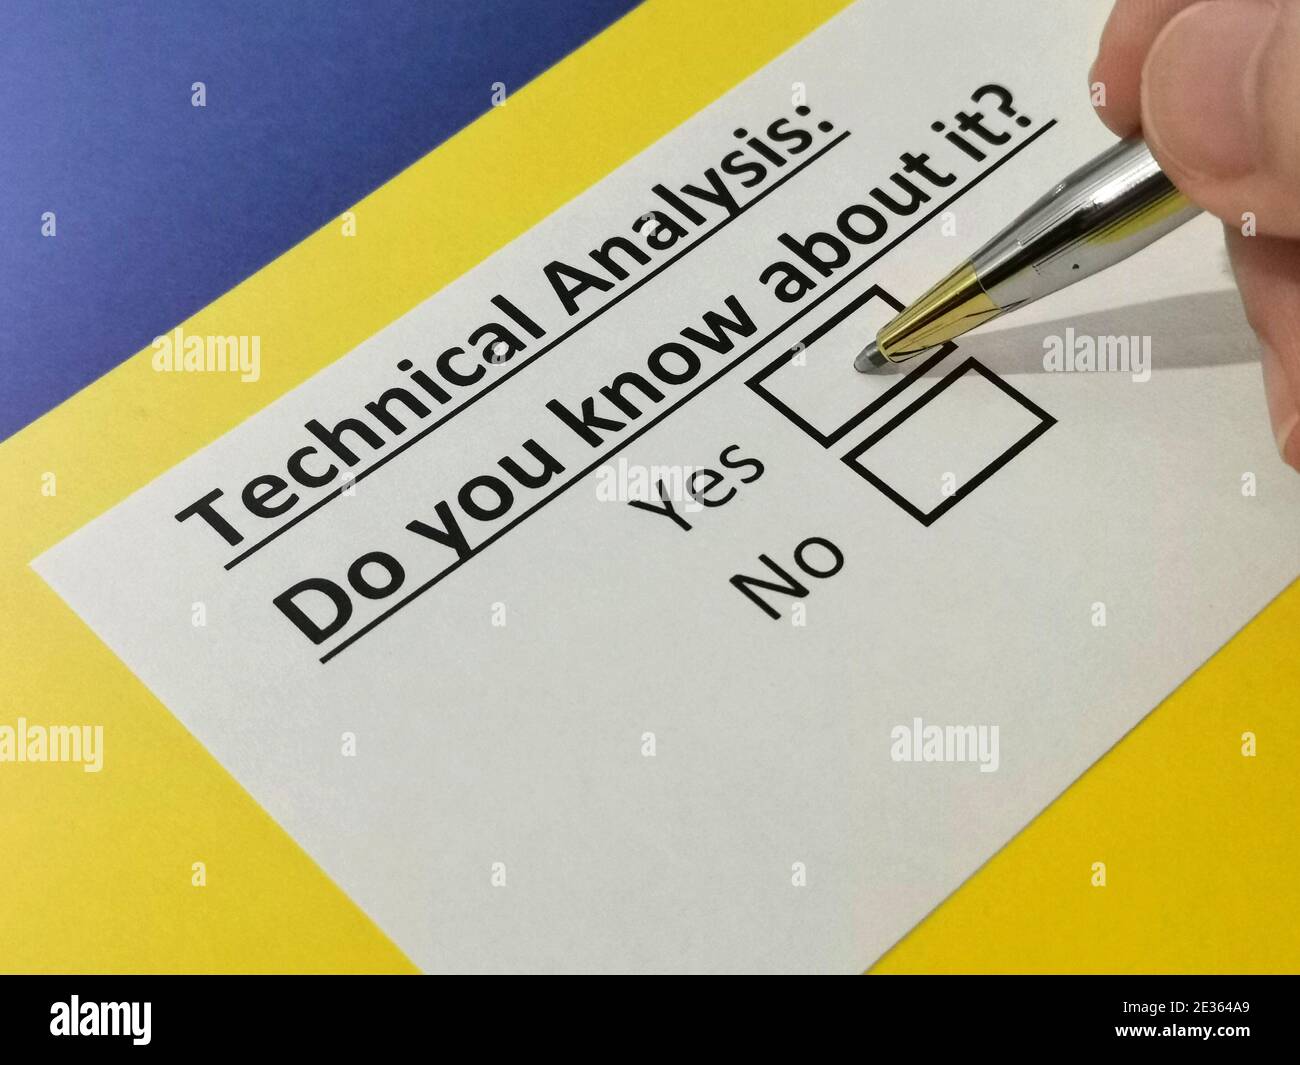 One person is answering question about technical analysis. Stock Photo